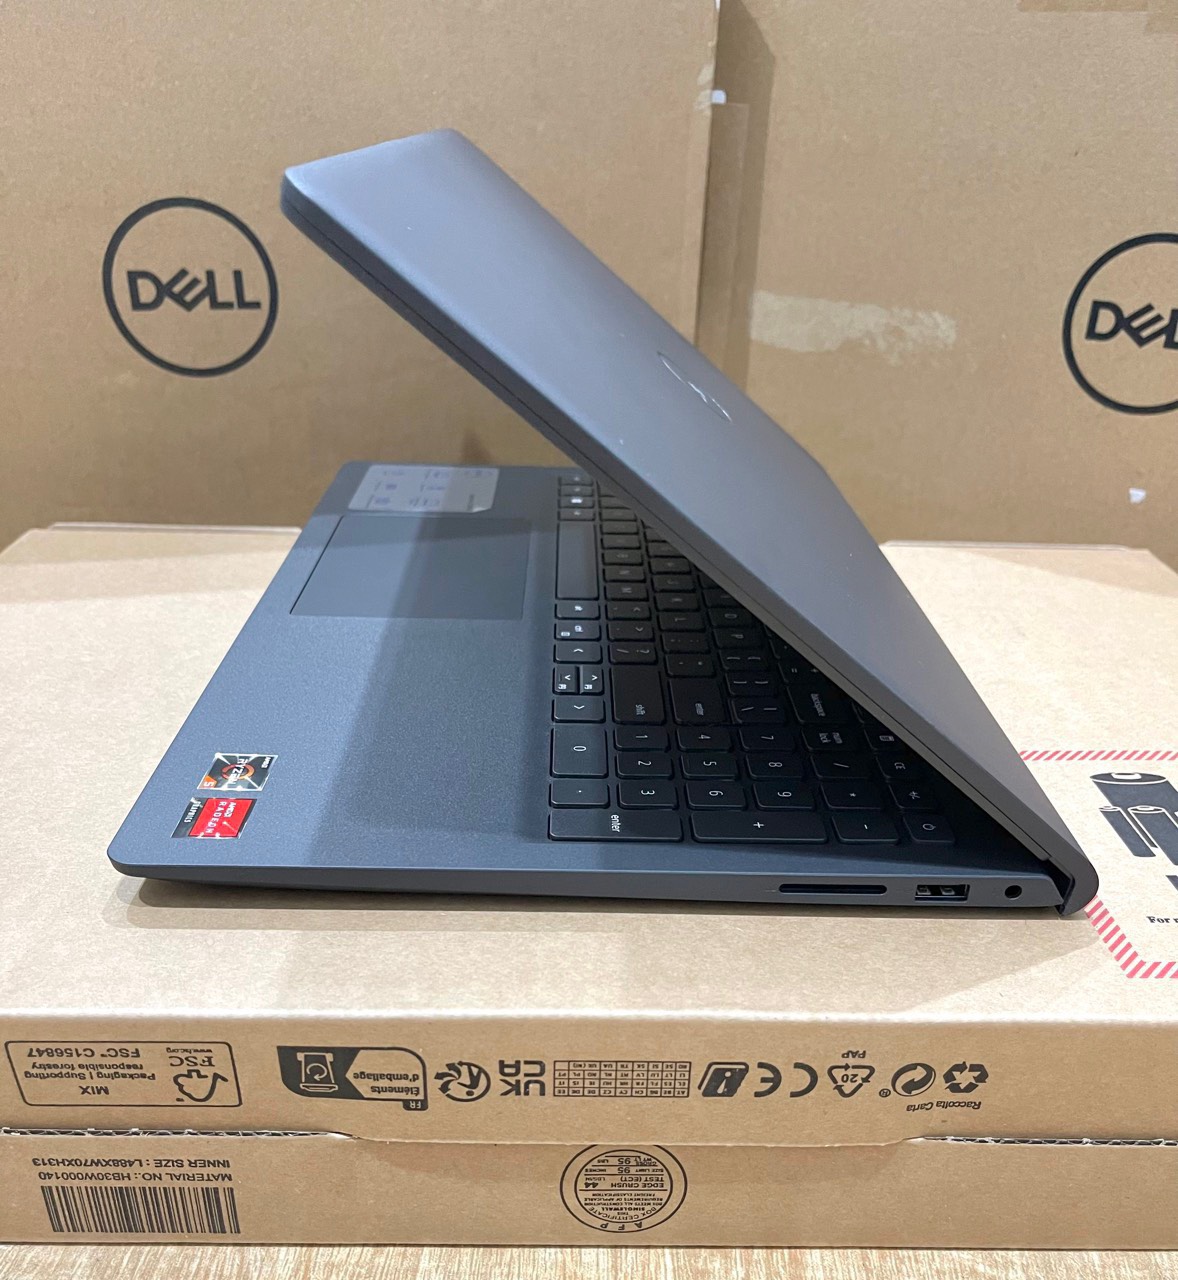 thiết kế dell inspiron 3515